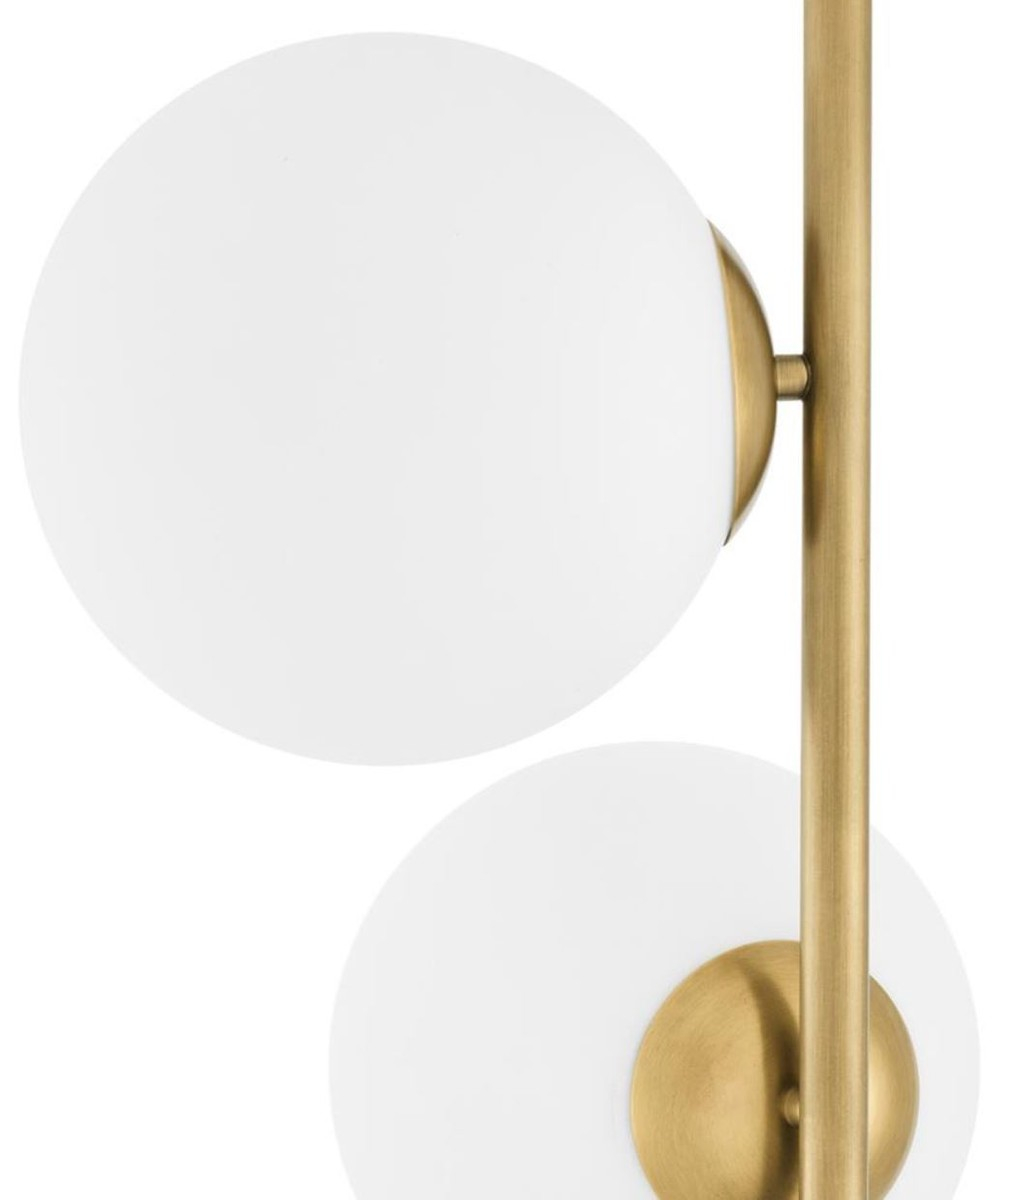 Casa Padrino Luxury Halogen Floor Lamp Antique Brass Black White 44 X H 190 Cm Energy Saving Lamp With Noble Marble Base with regard to size 1018 X 1200